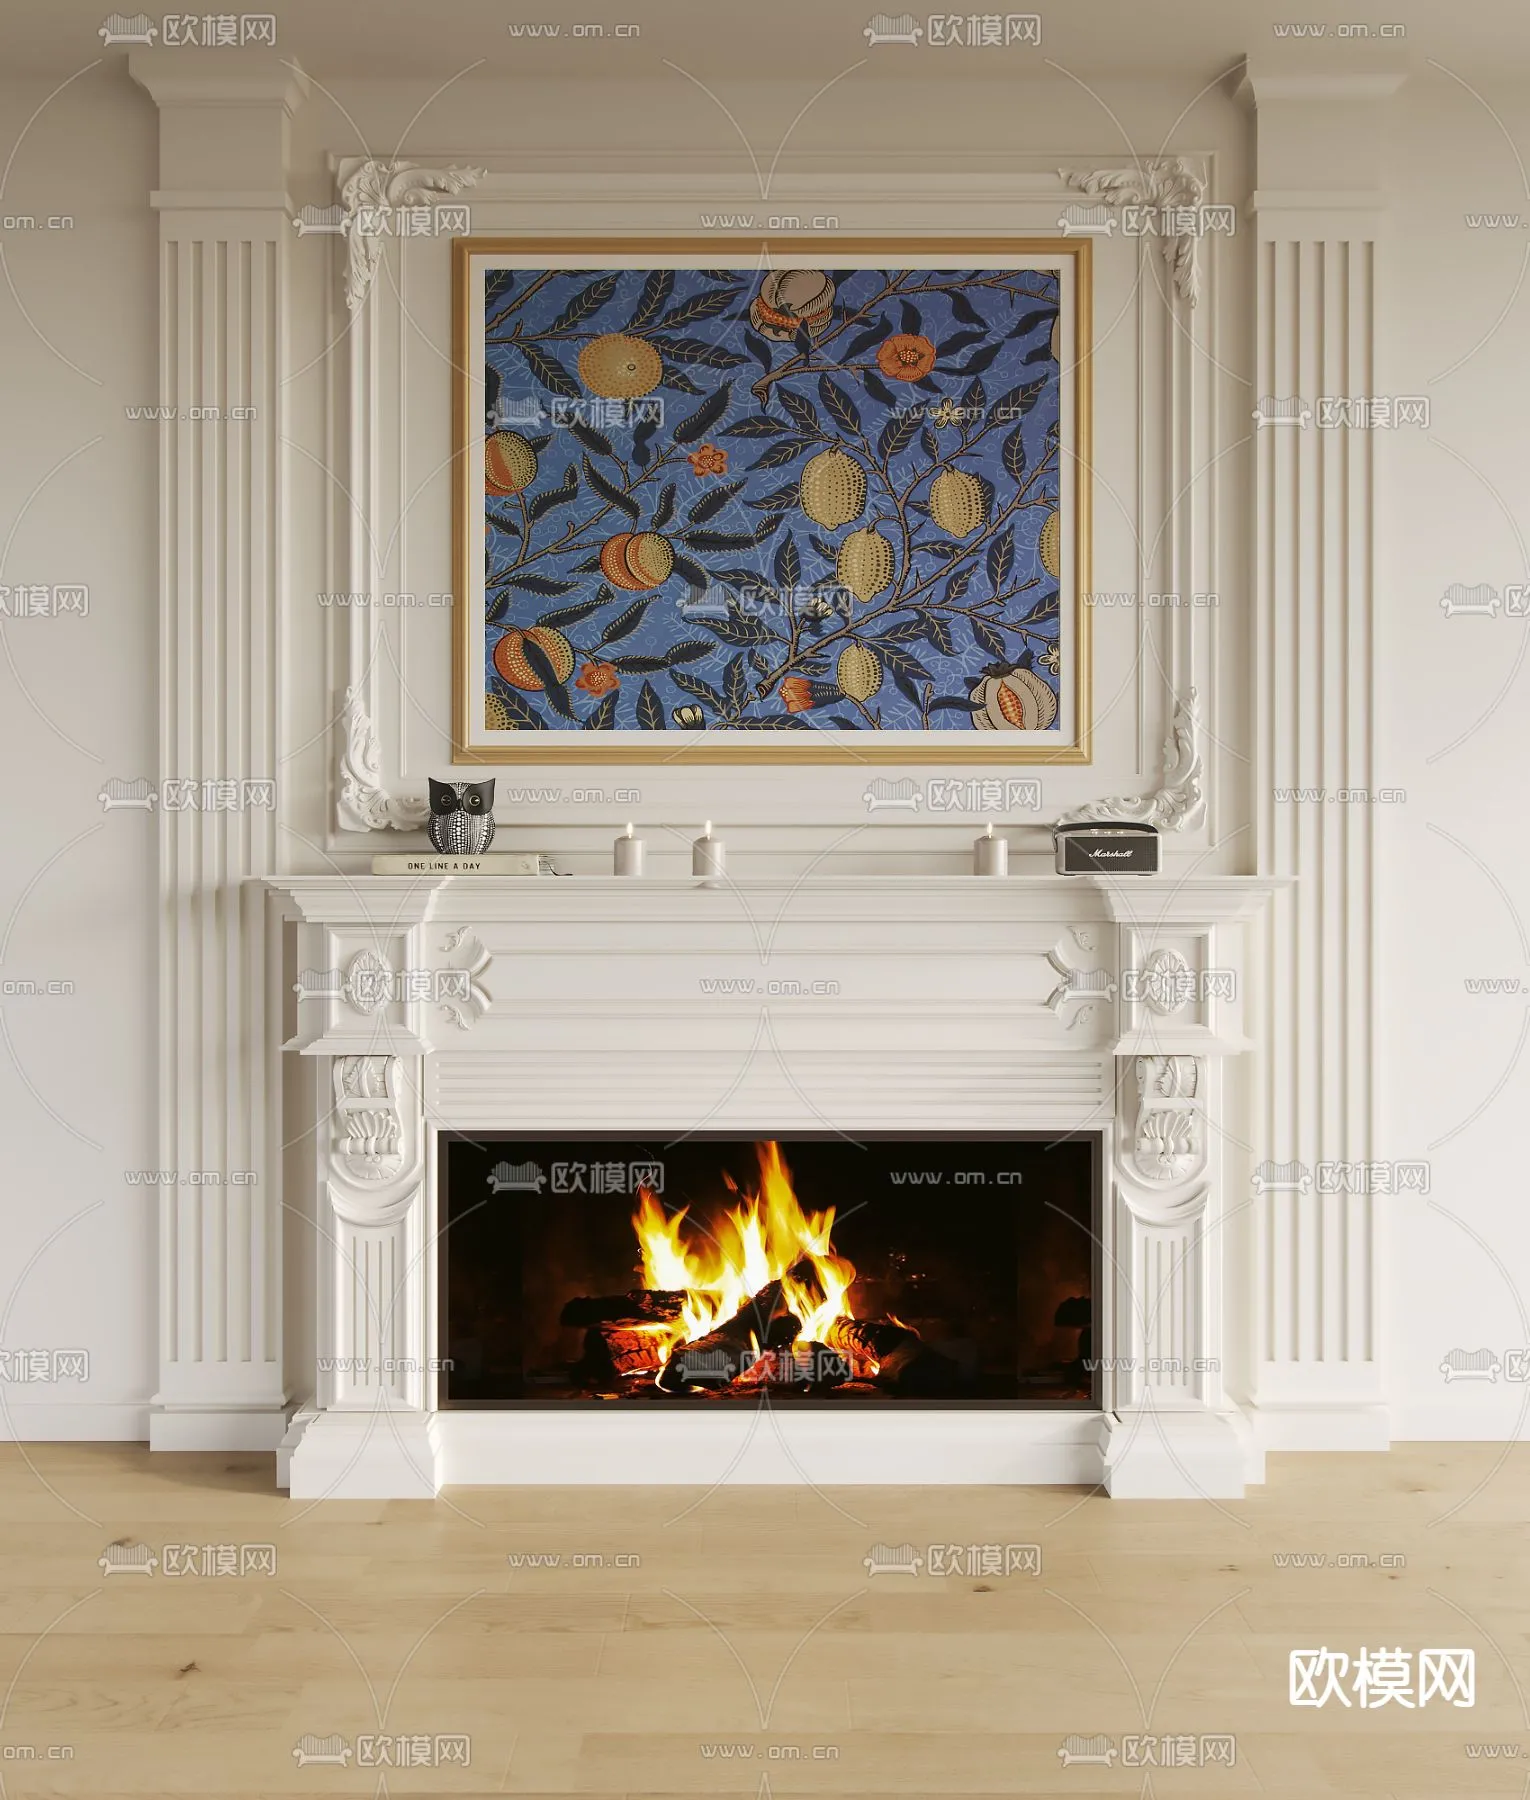 CLASSIC – FIREPLACE 3DMODELS – 079